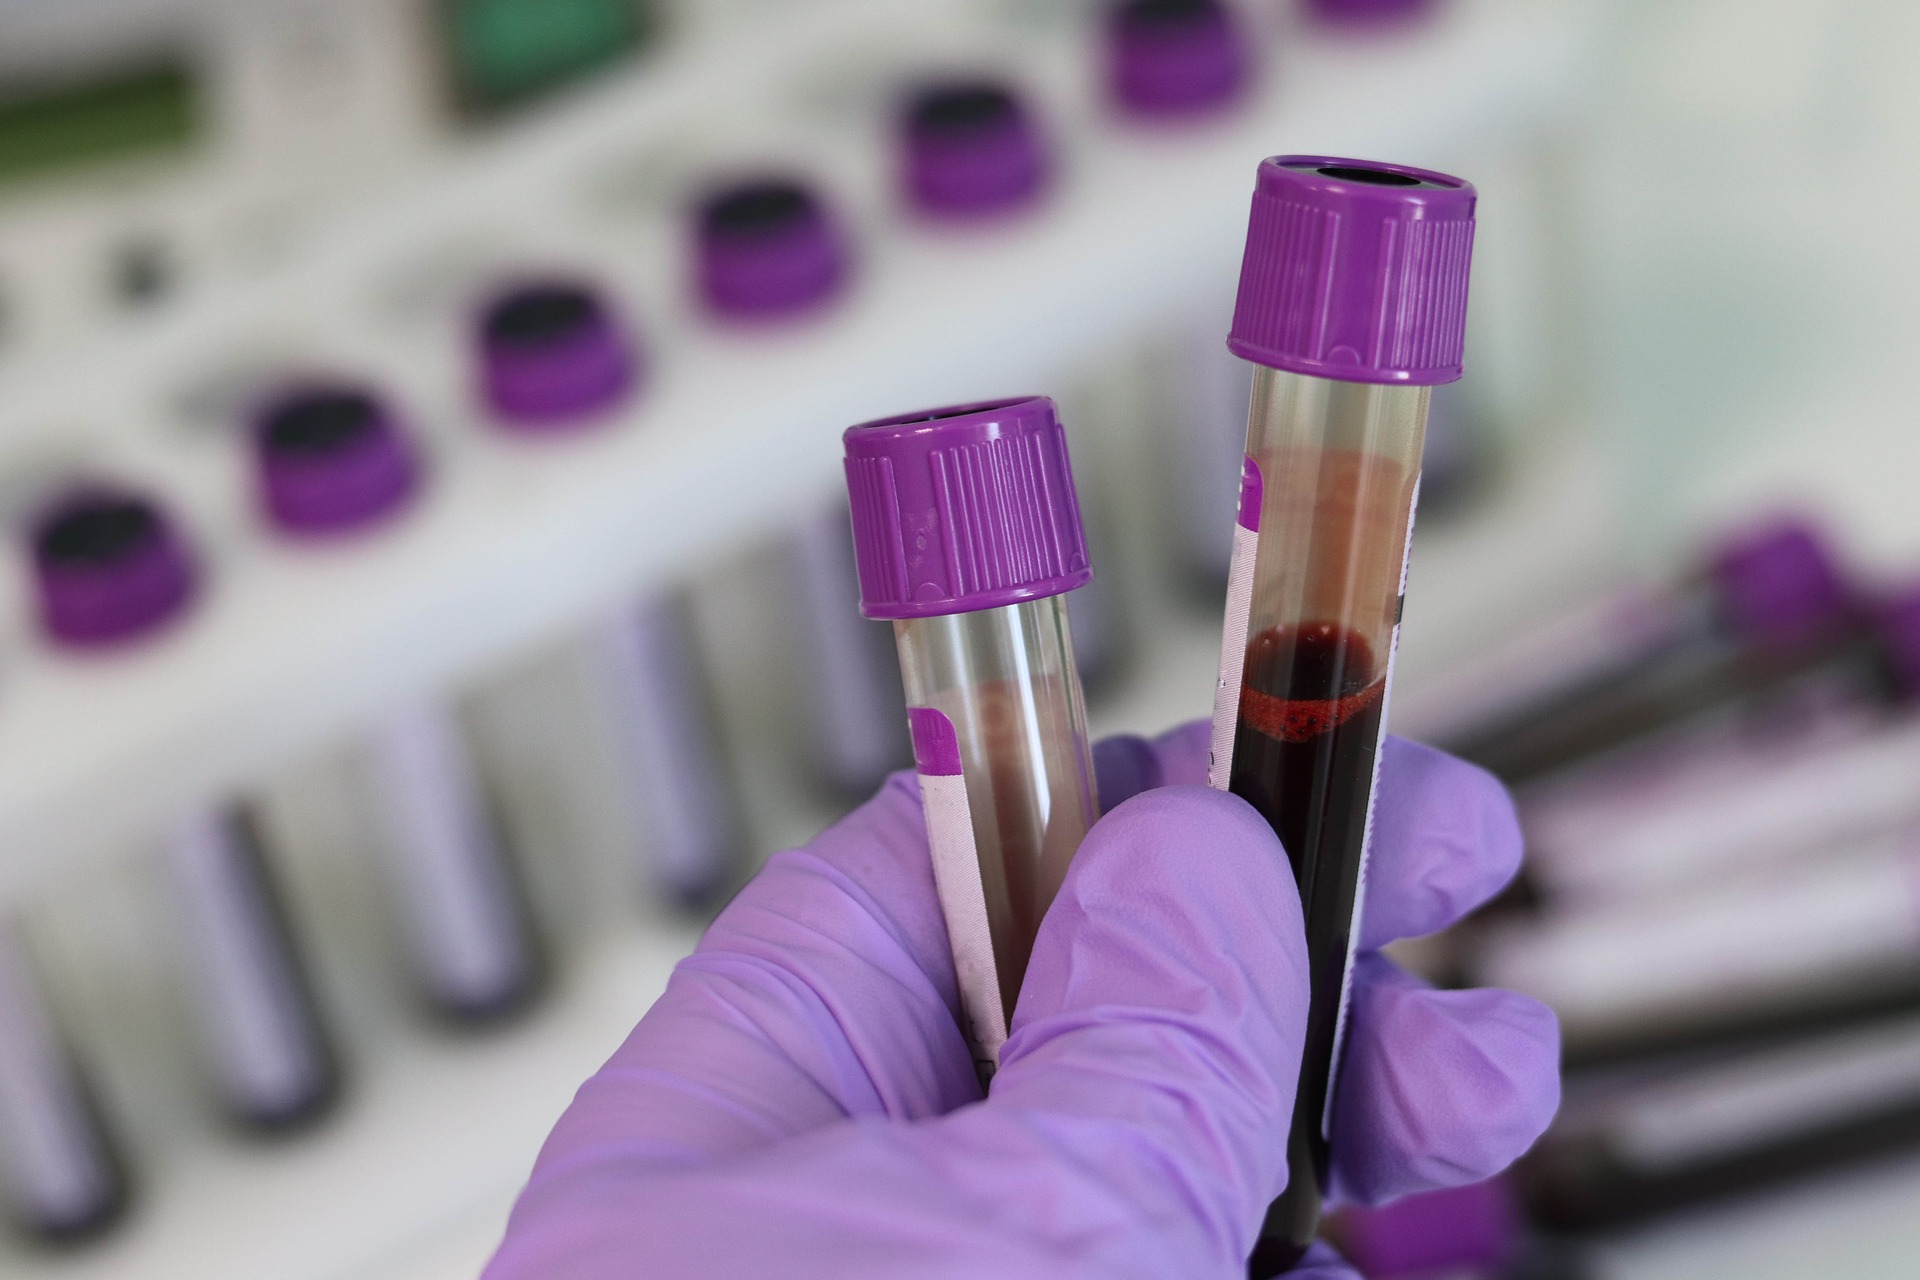 Haemoglobin blood test: What to expect